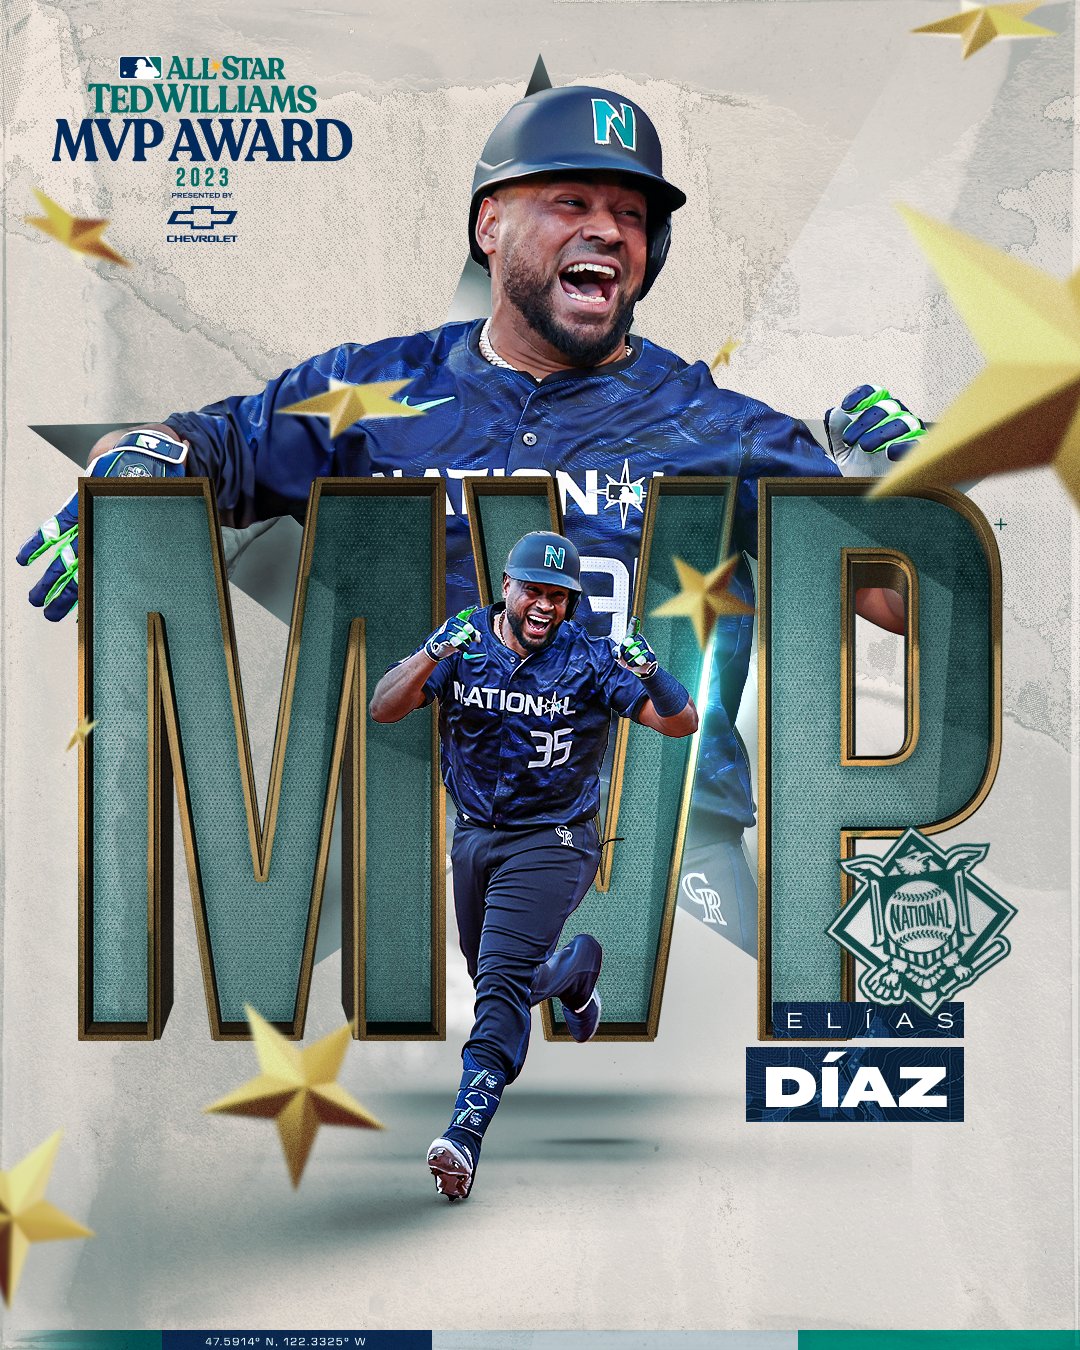 Elias Díaz, MVP
All-Star Ted Williams MVP Award 2023, Presented by Chevrolet.
Pictured: Cutouts of Díaz smiling and celebrating as he rounds the bases after hitting a go-ahead home run during the 2023 All-Star Game. He is wearing a navy blue NL All-Star jersey and a navy blue batting helmet.